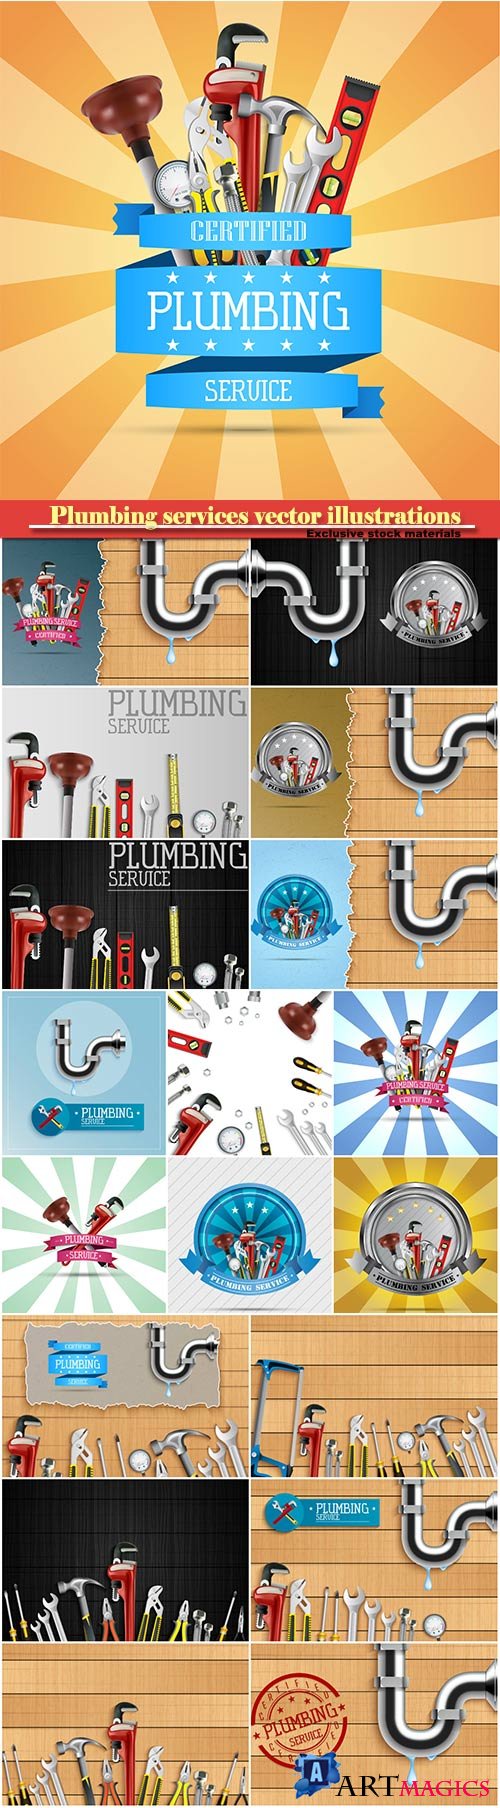 Plumbing services vector illustrations